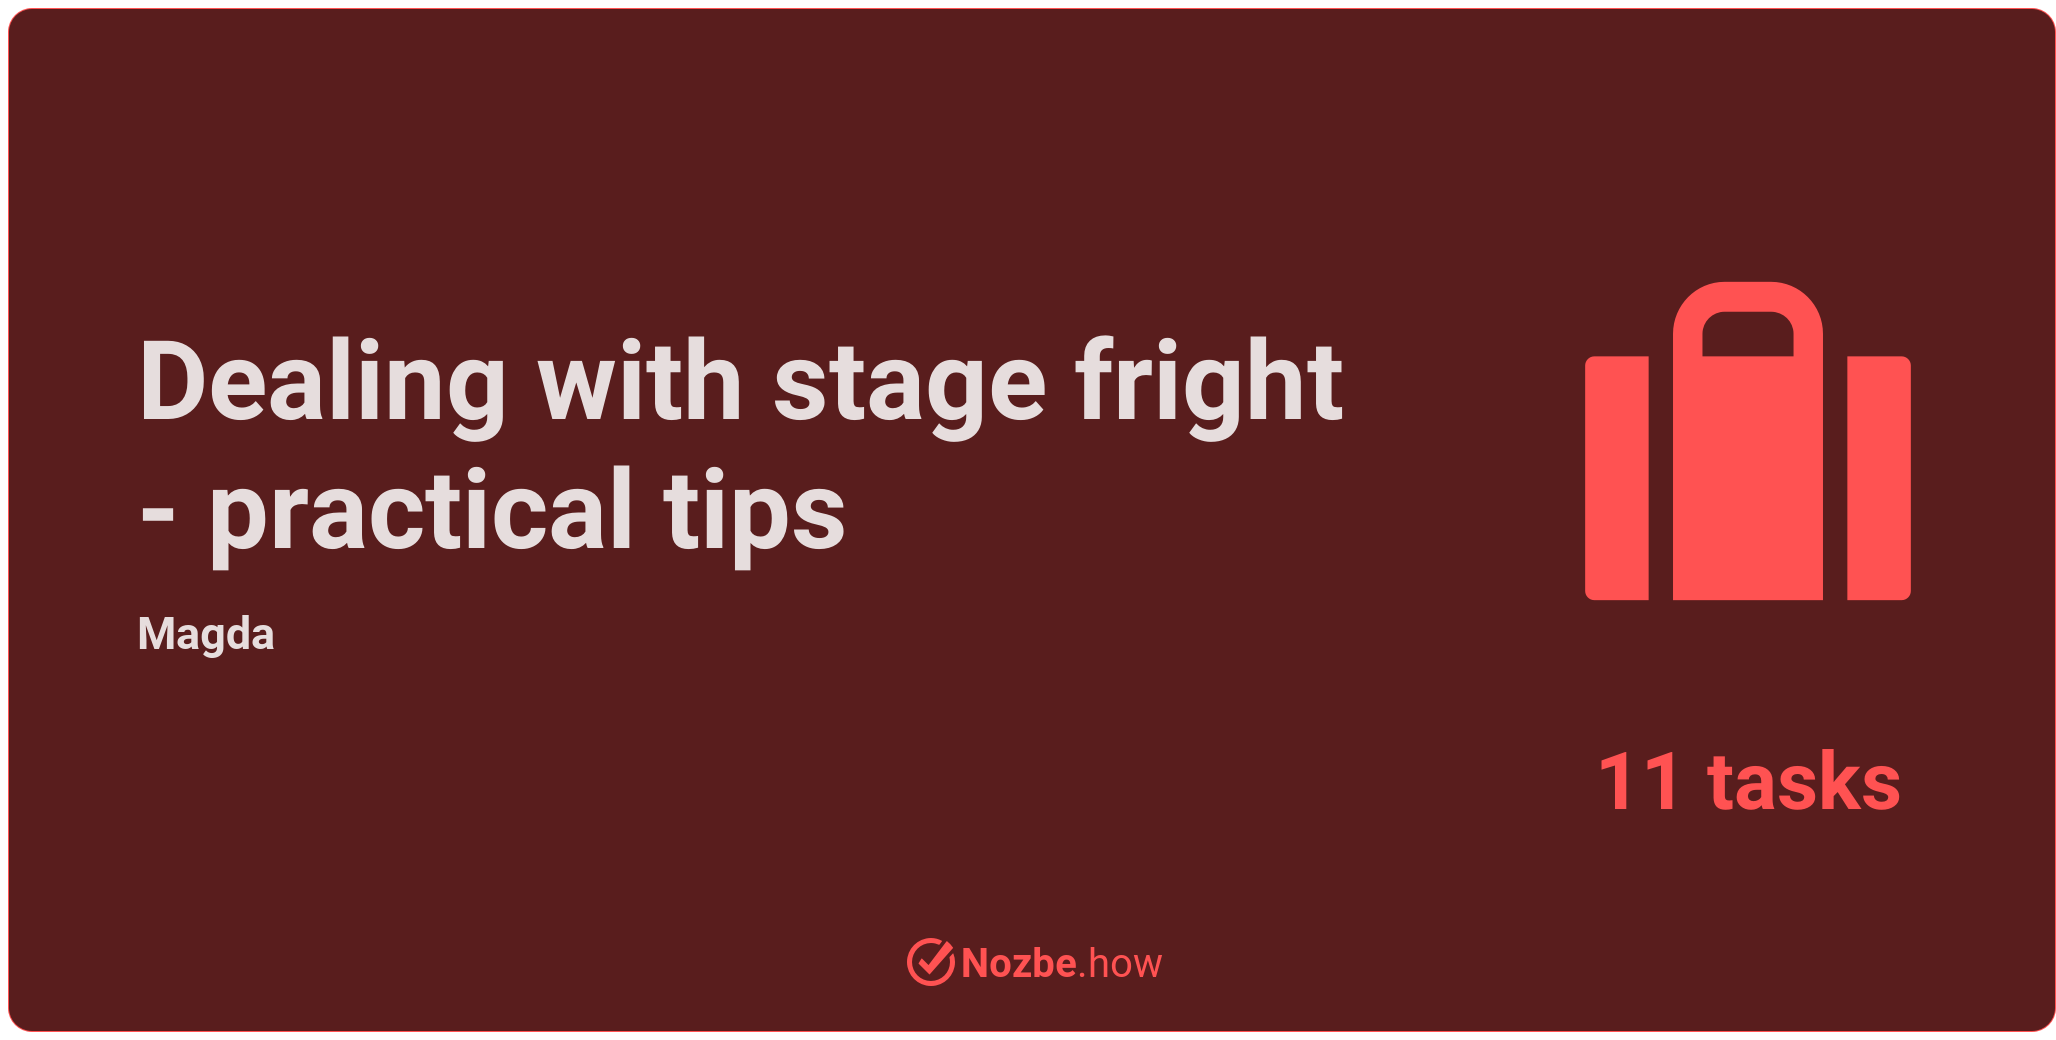 Dealing with stage fright - practical tips